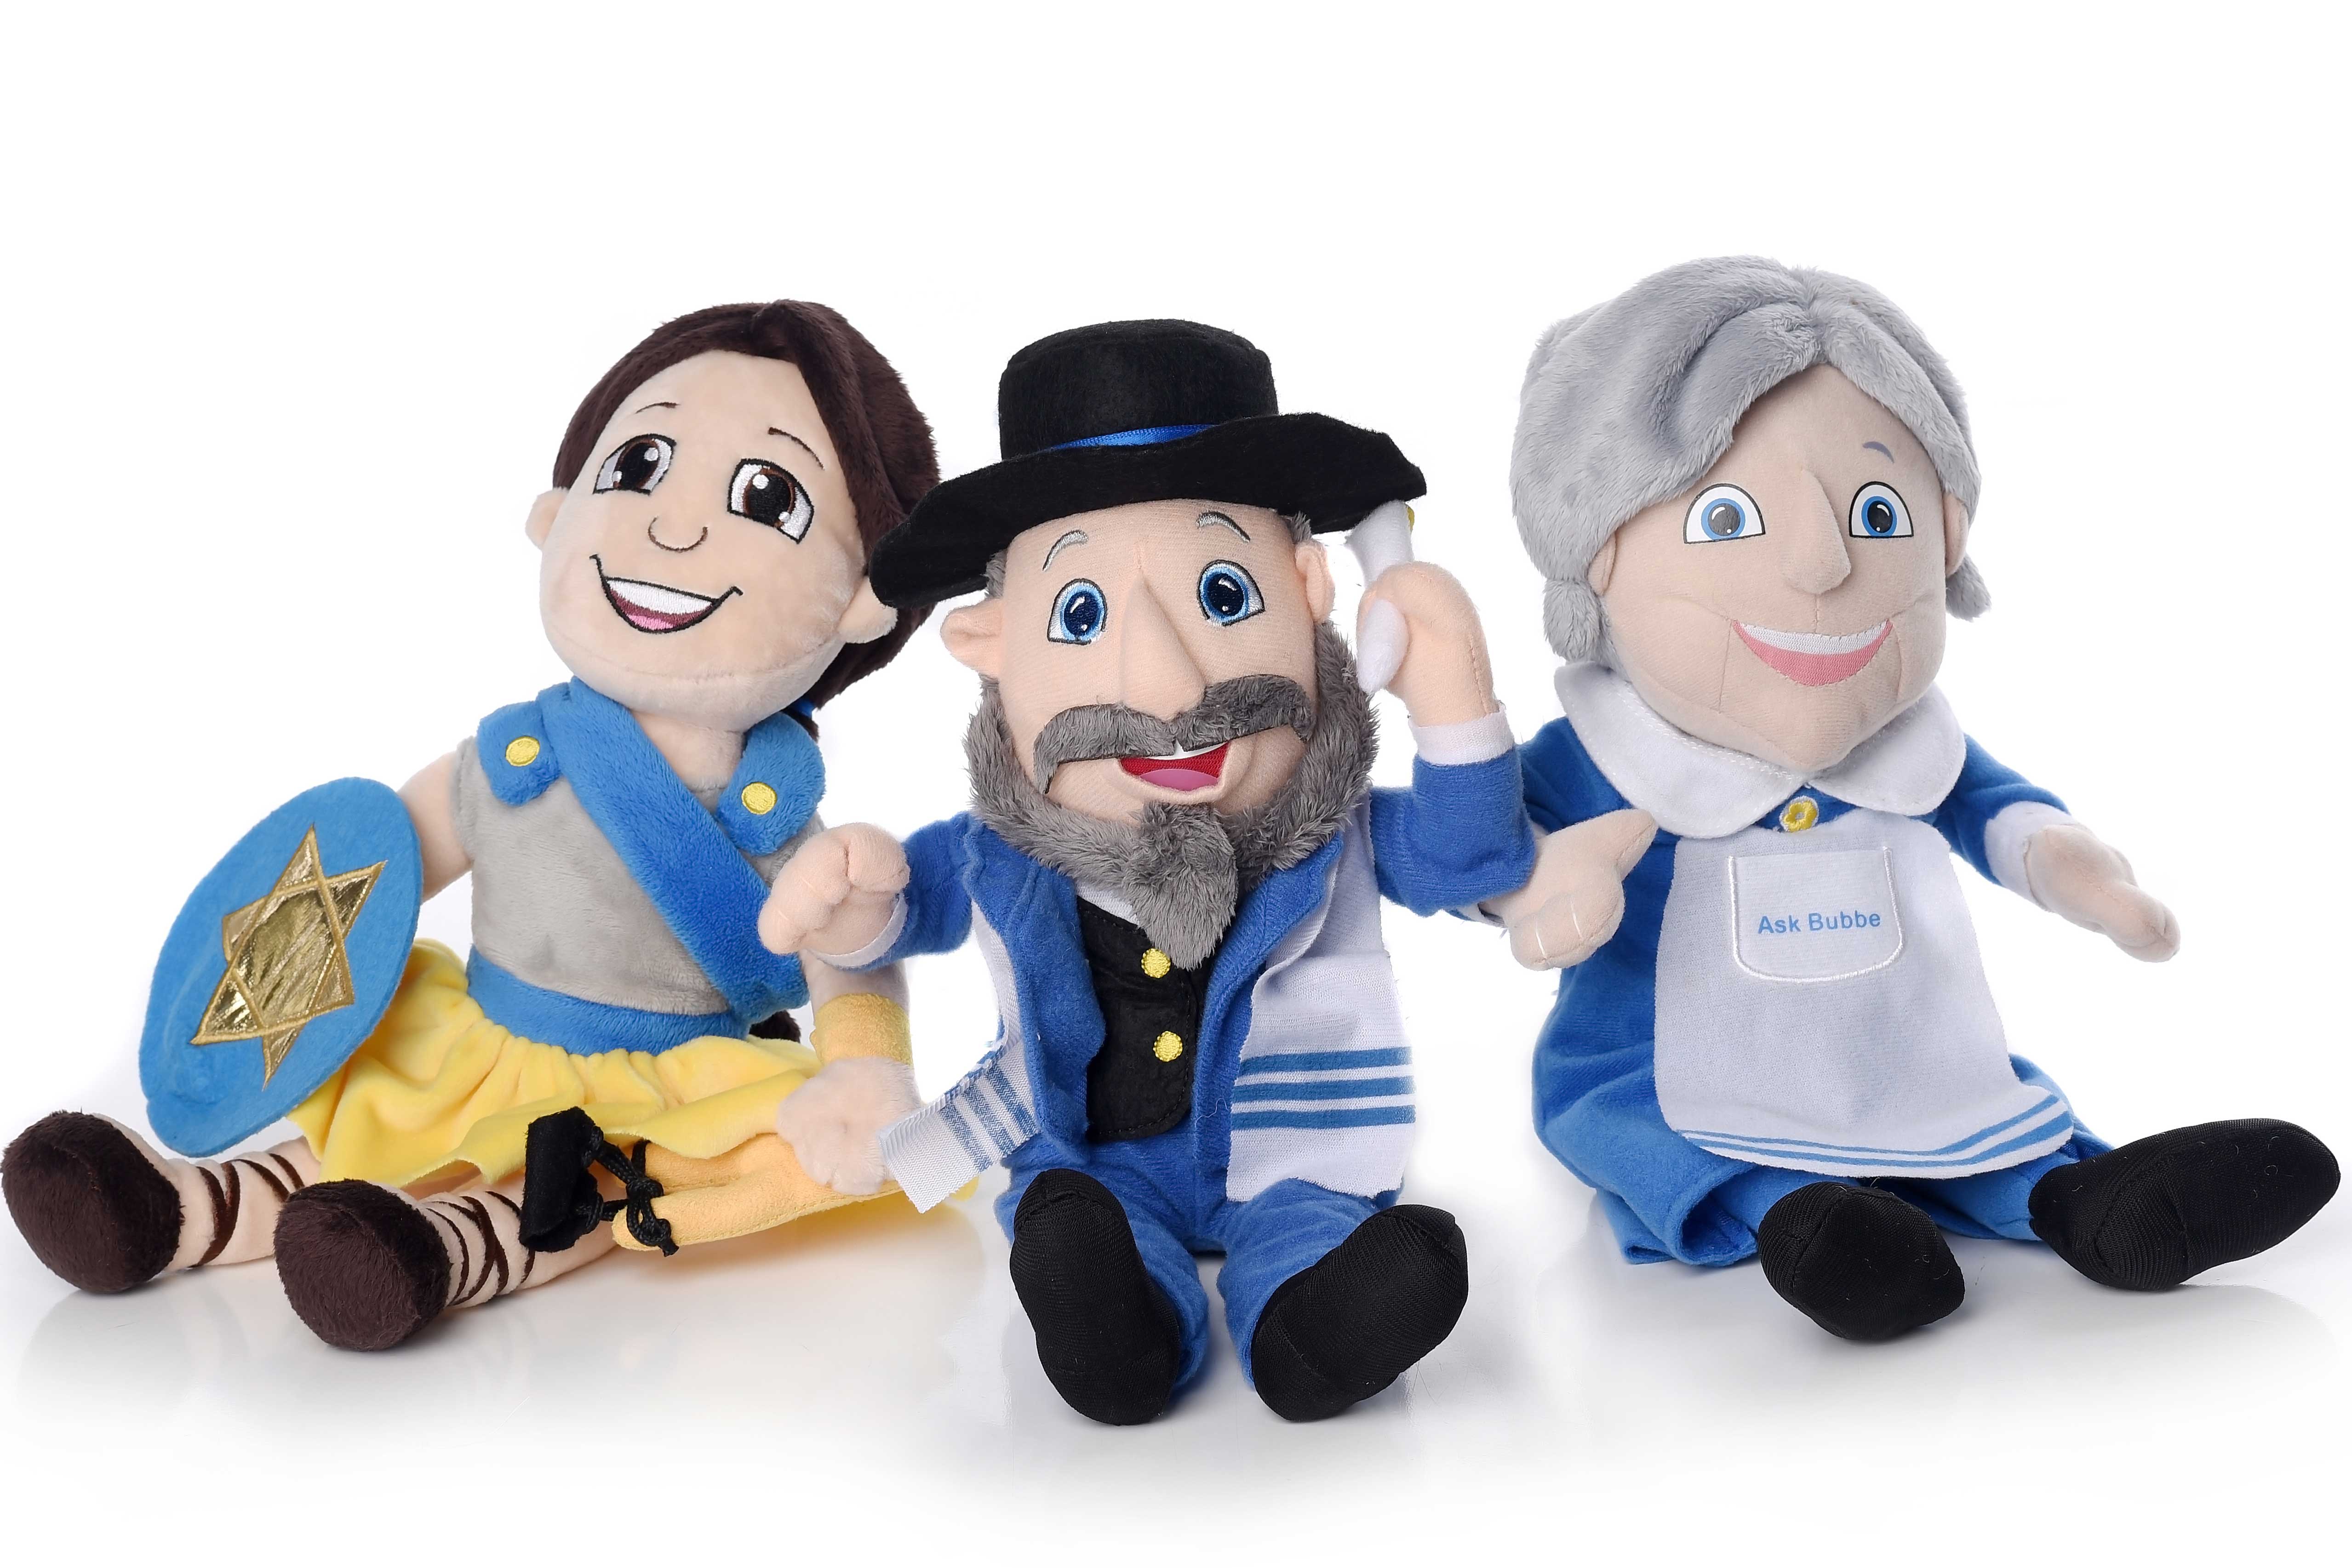 From left to right, Hannah the Hanukkah Hero, Moshe the Mensch and Bubbe the Jewish Grandmother. 